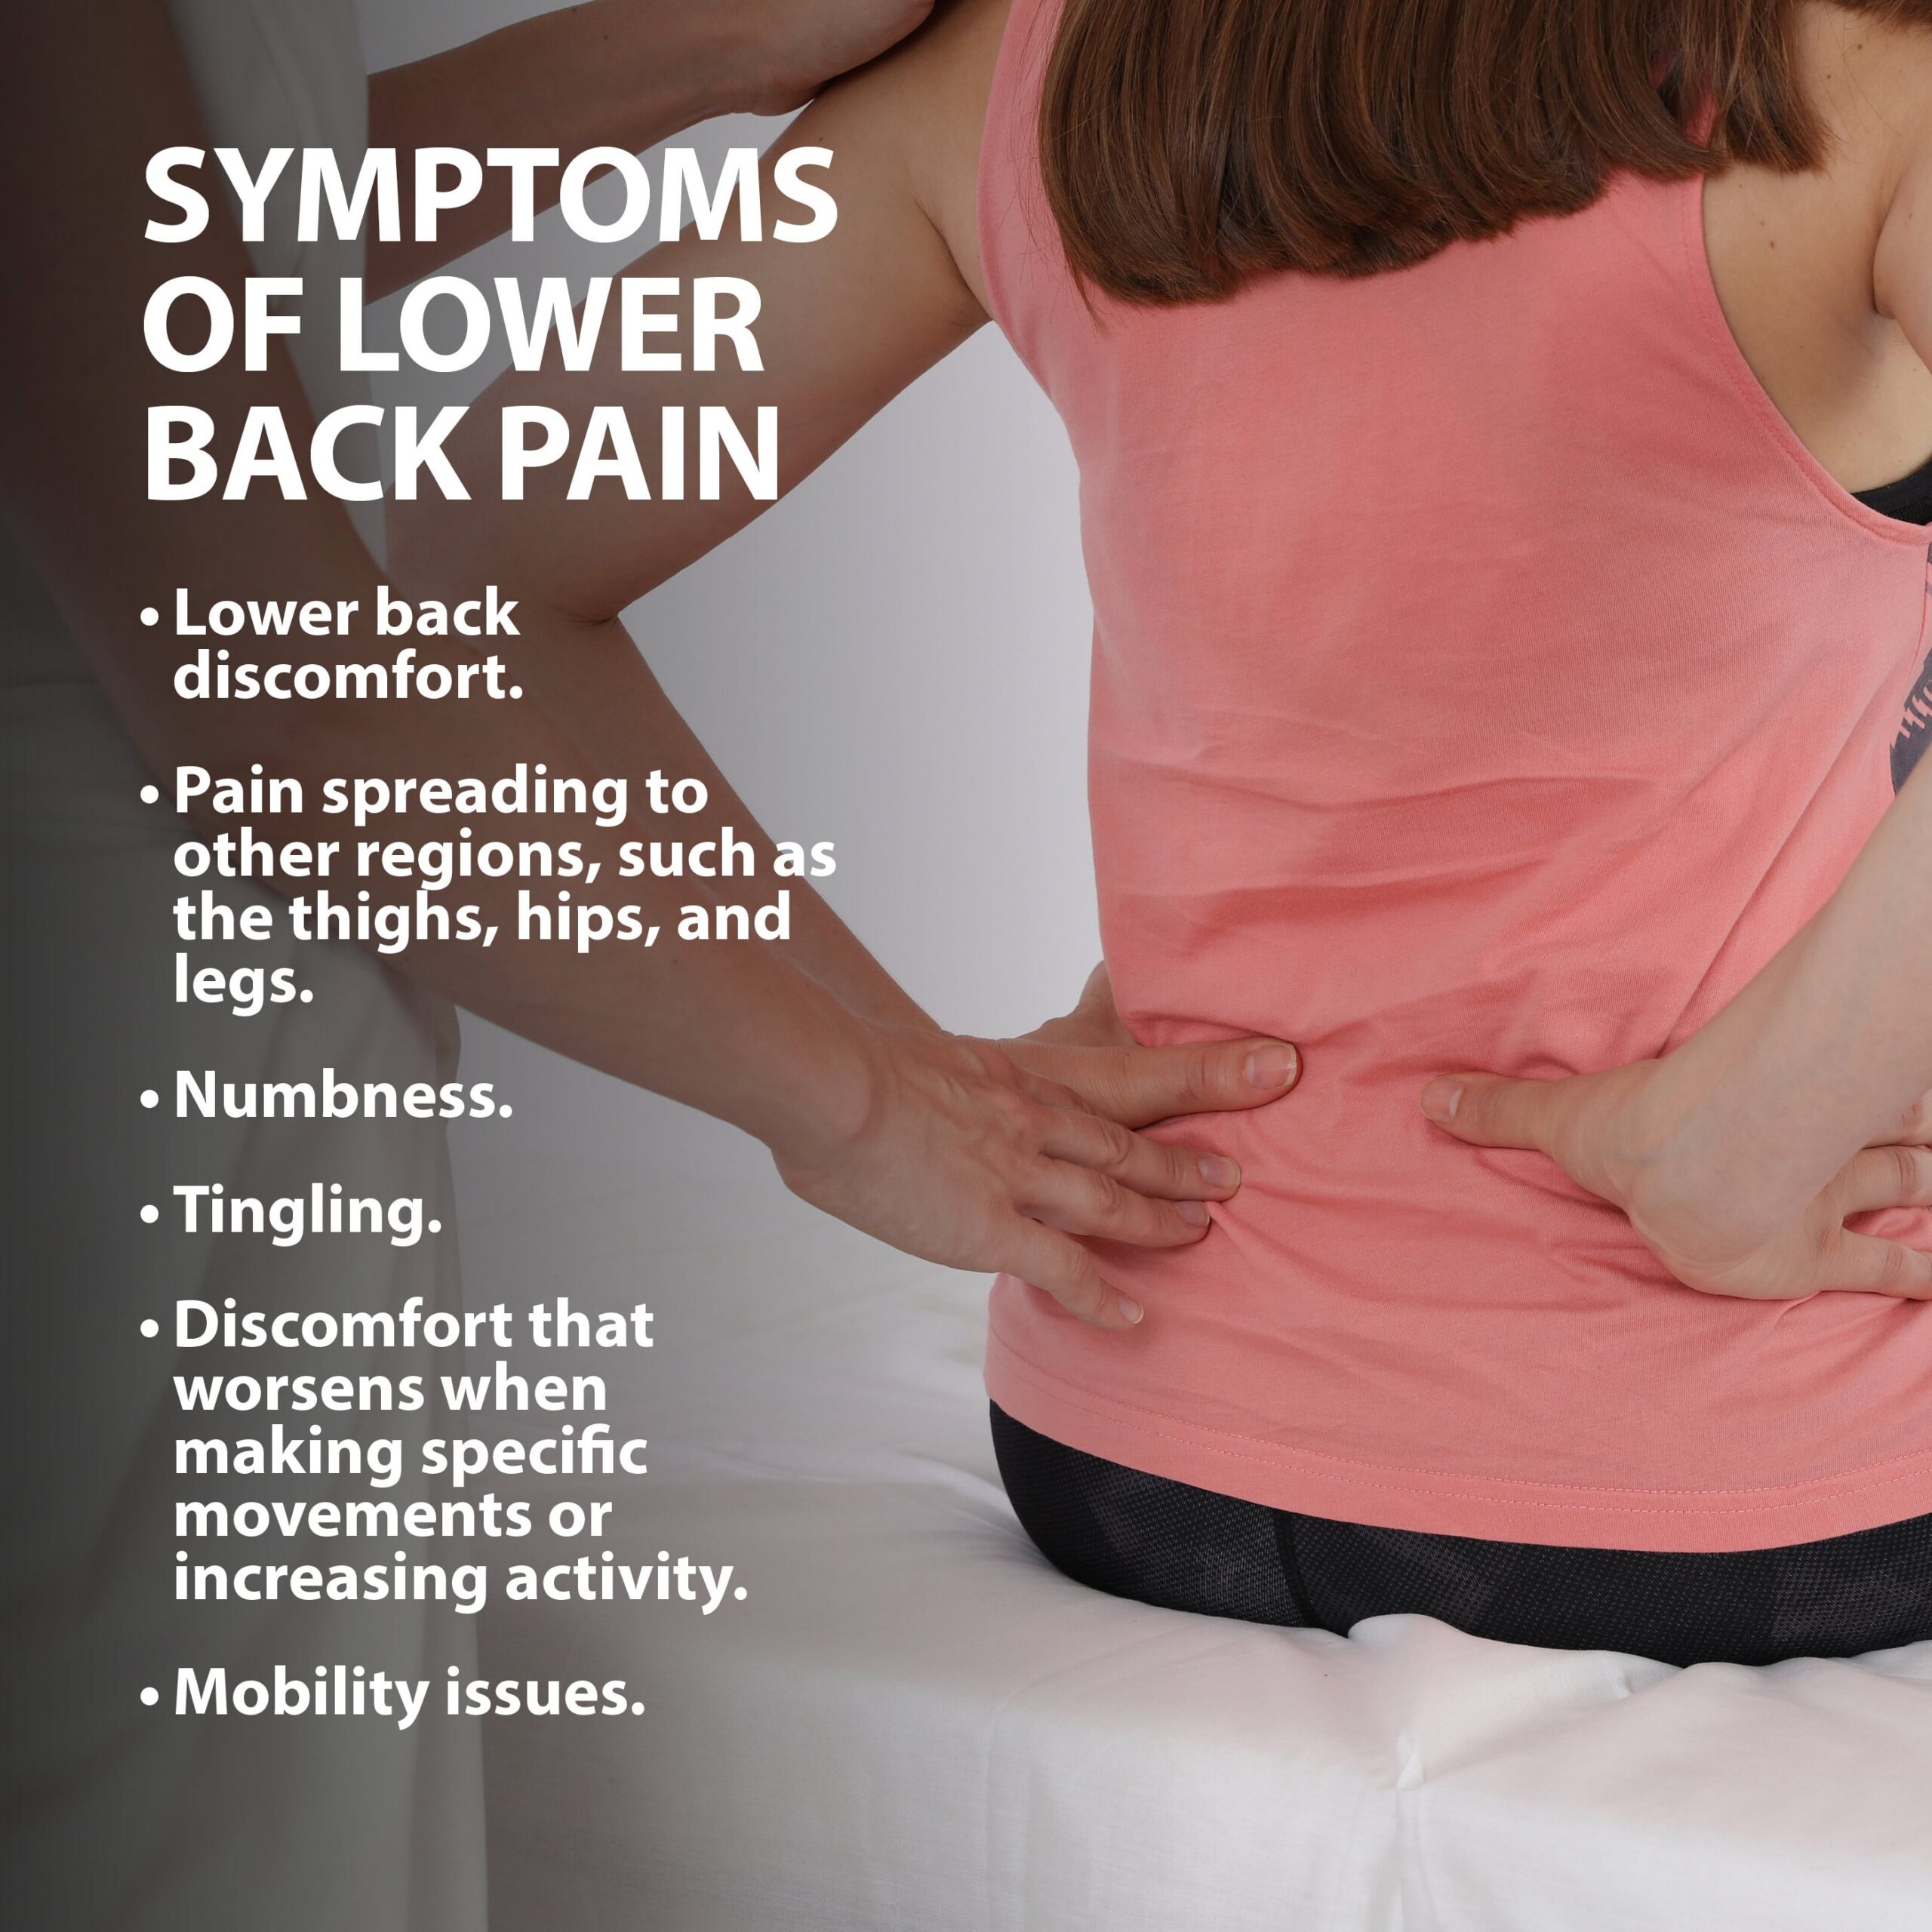 symptoms of lower back pain listed next to a woman holding her back. Contact FOI for what to expect after lumbar epidural steroid injection - a procedure to help ease lower back pain.